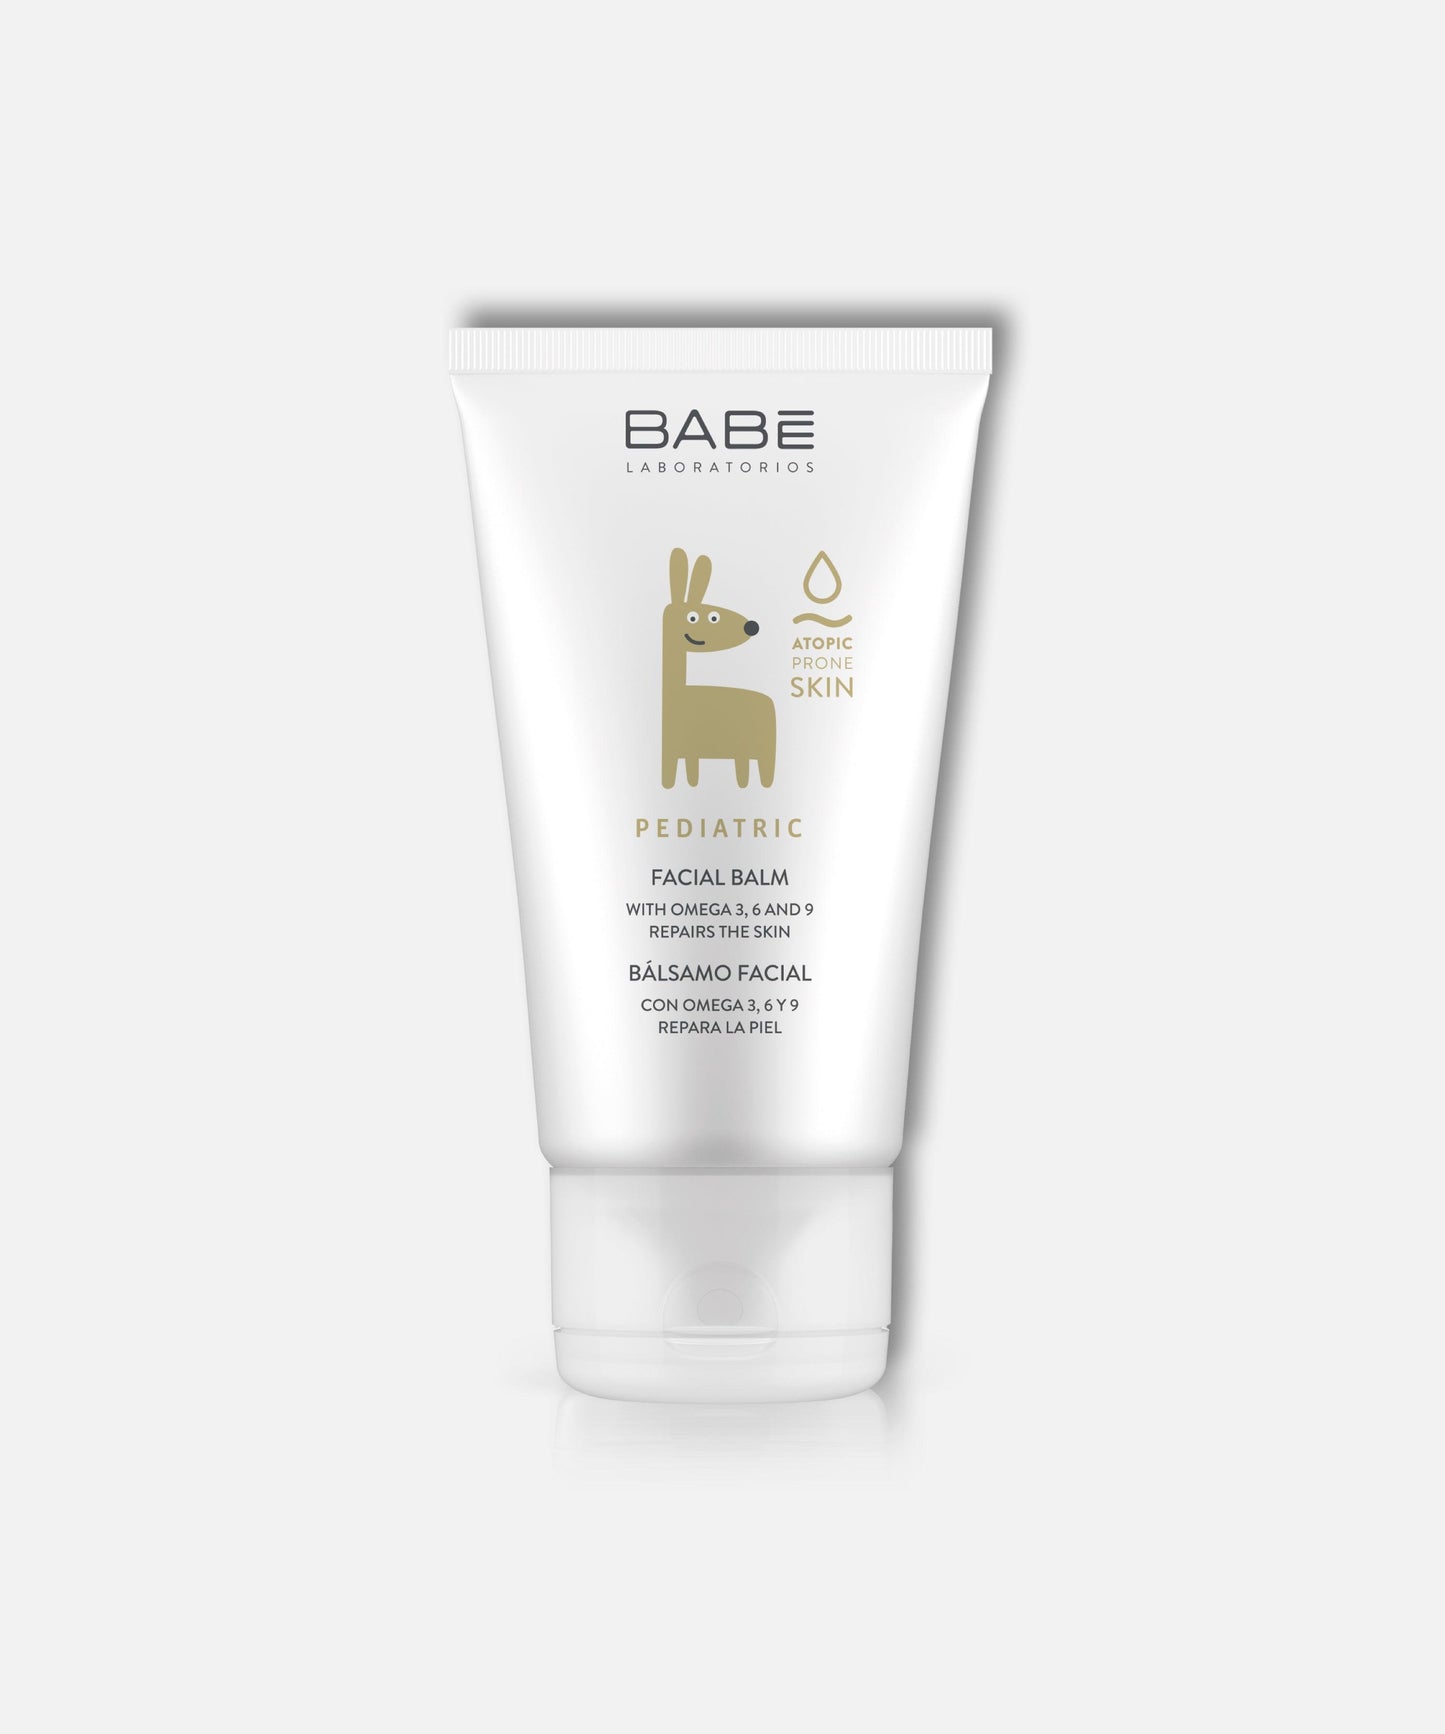 Load image into Gallery viewer, BABÉ Pediatric Facial Balm 50 ml - Kshipra Health Solutions
